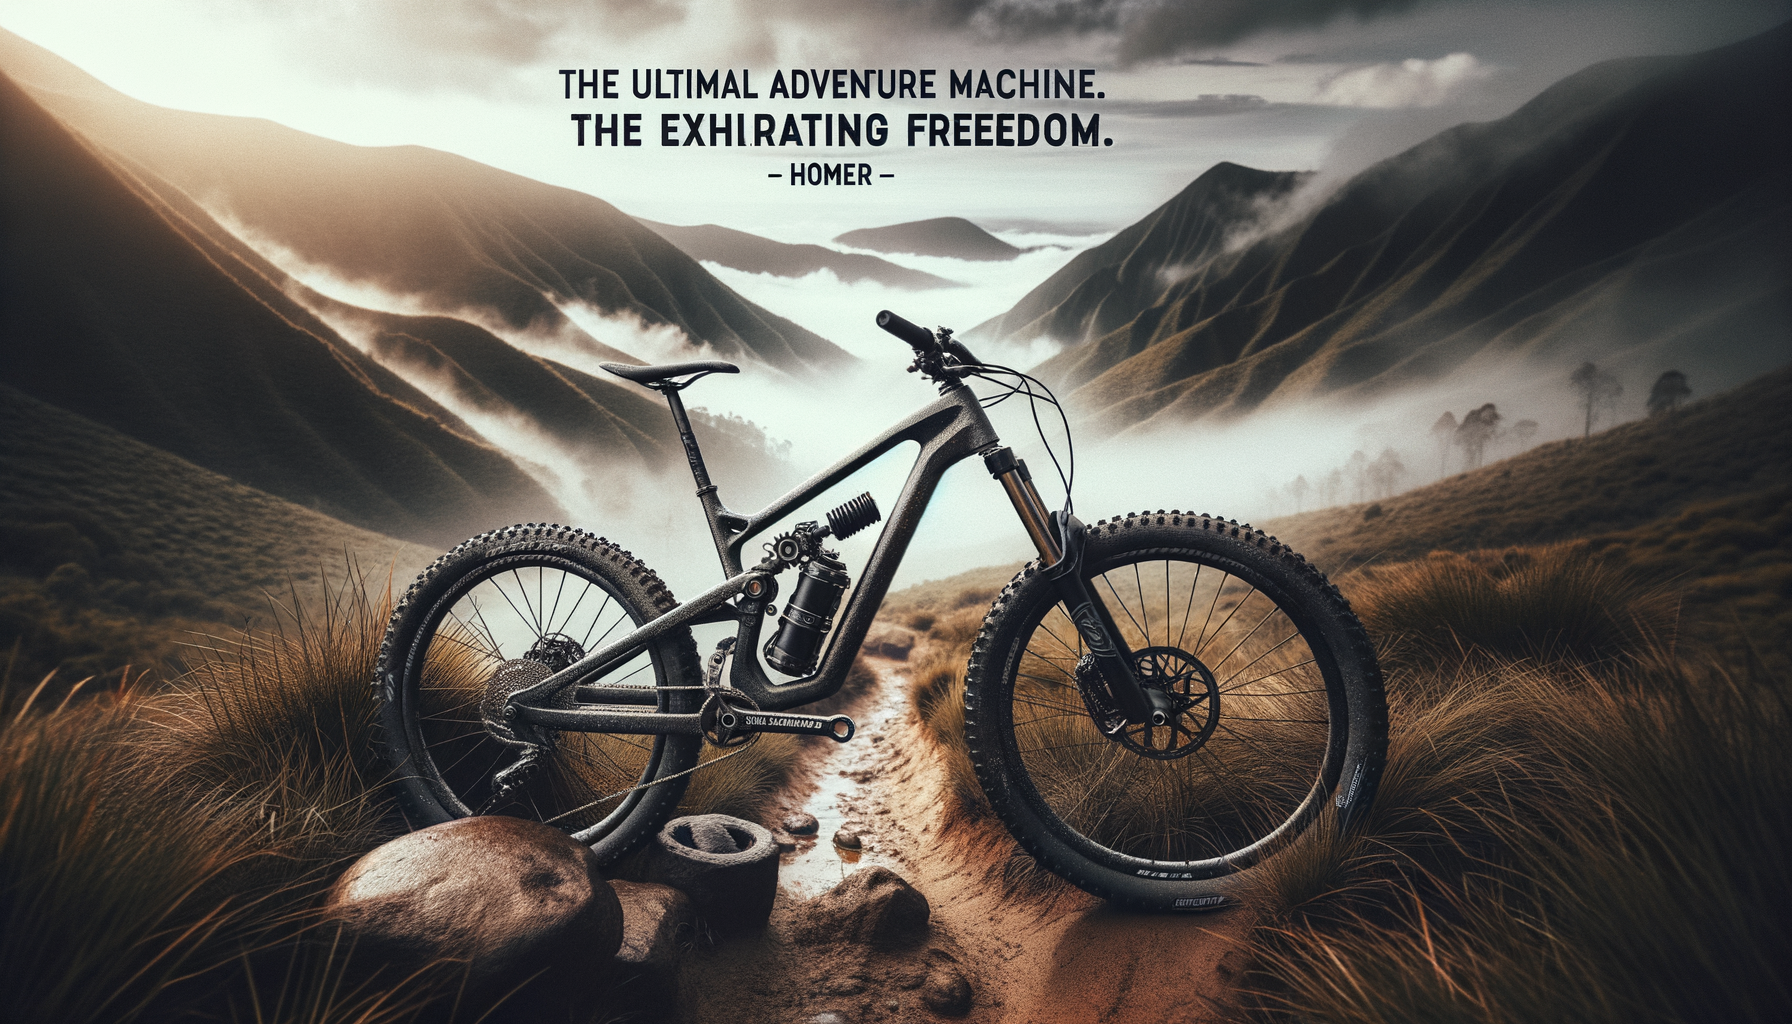 discover the innovation of the freedom machine's homer, a steel, single-pivot gearbox driven enduro bike featuring 27.5-inch wheels.